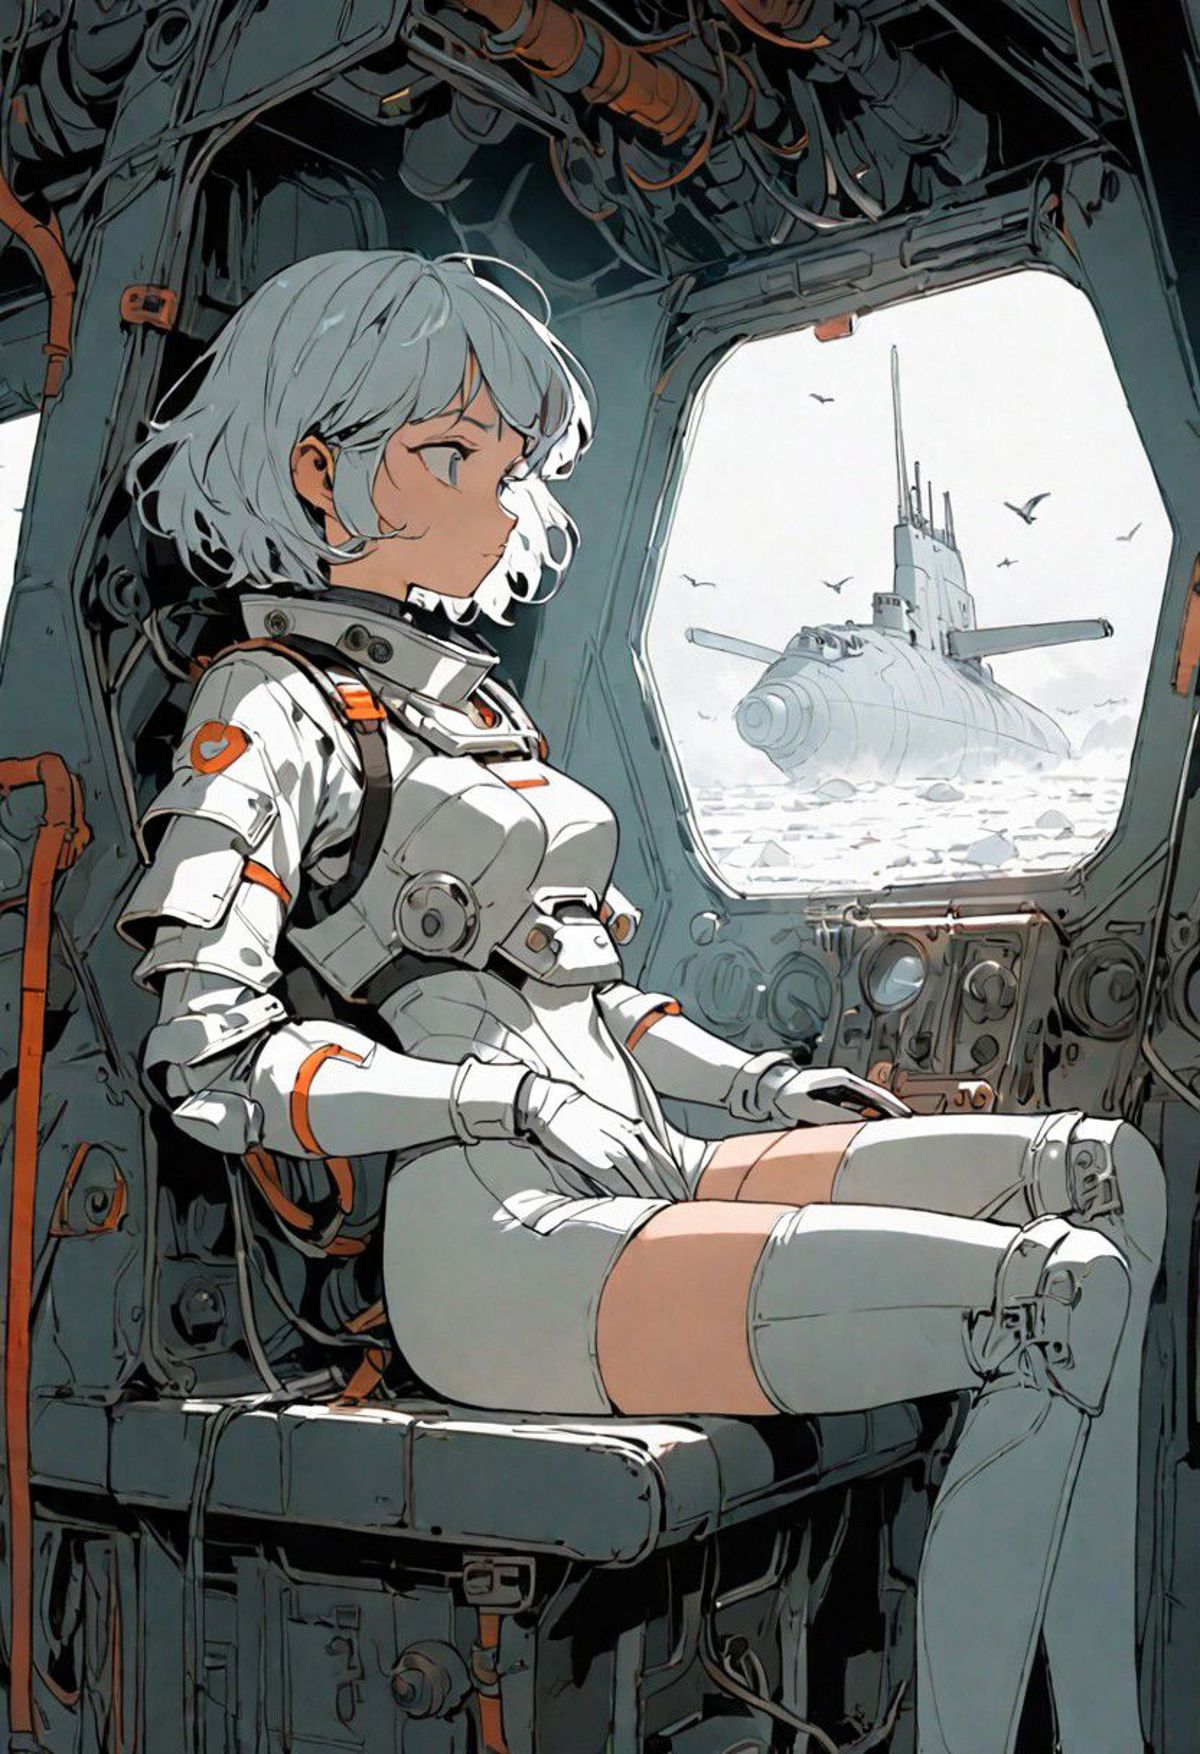 A woman wearing a white spacesuit sitting in a spacecraft cockpit.